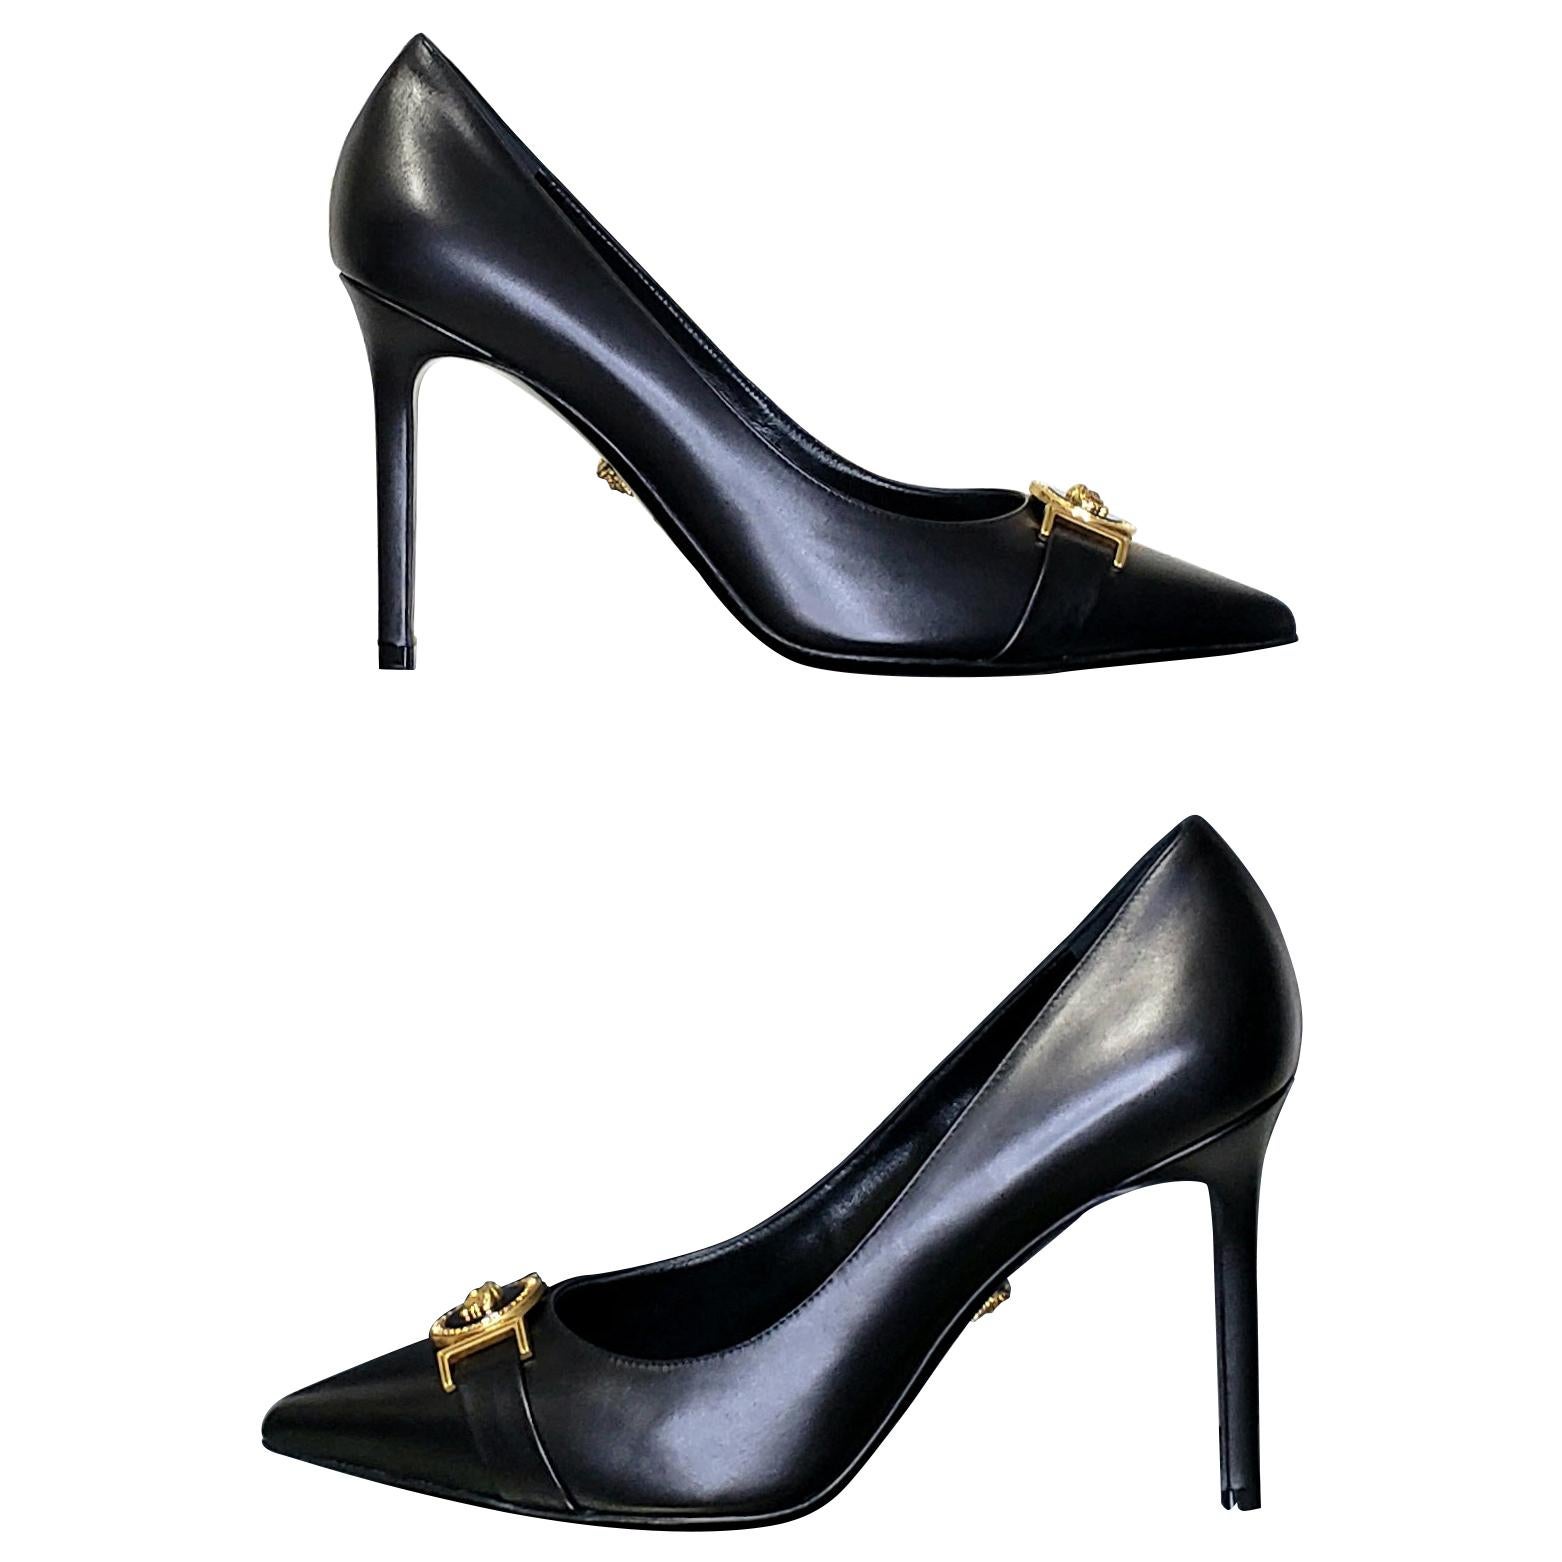 NEW VERSACE BLACK LEATHER PUMP SHOES with GOLD MEDUSA BUCKLE  40